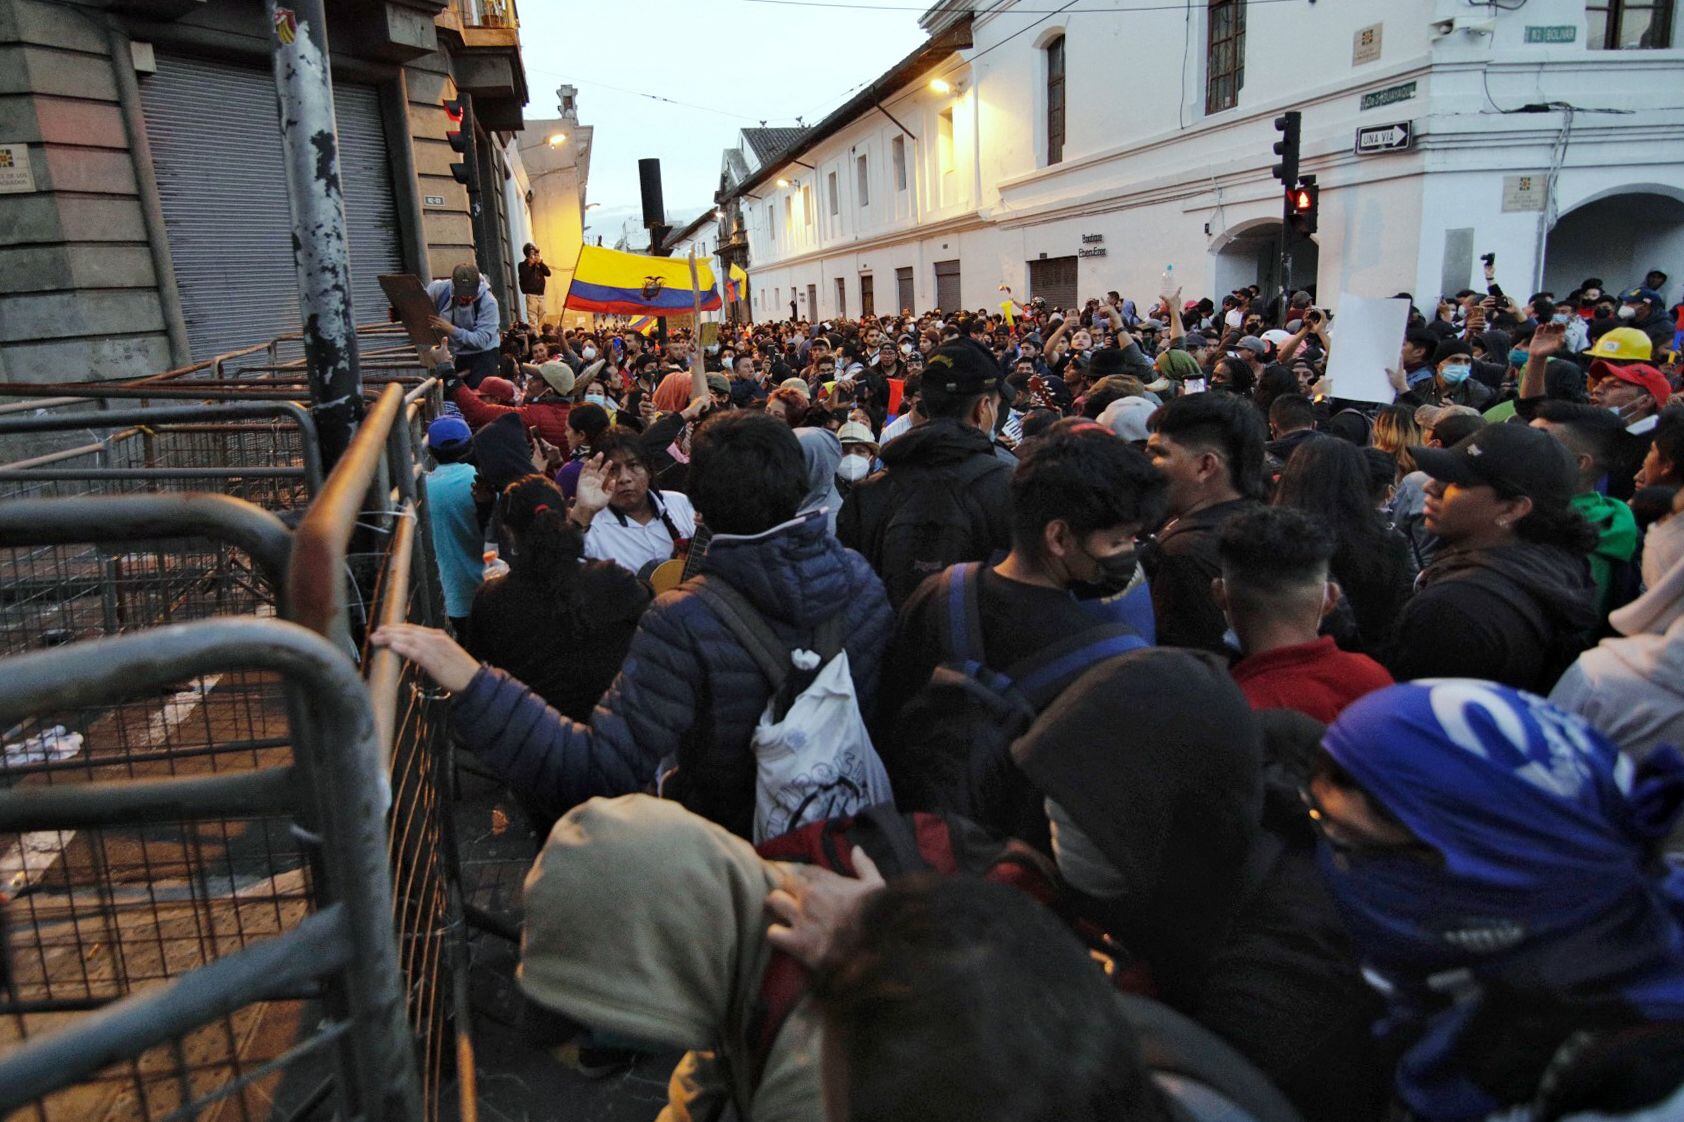 Demonstrators shout slogans next to a fence during clashes with the police as part of the protests led by indigenous people against the government of President Guillermo Lasso that began on Monday, in the surroundings of the Carondelet government palace, in Quito.